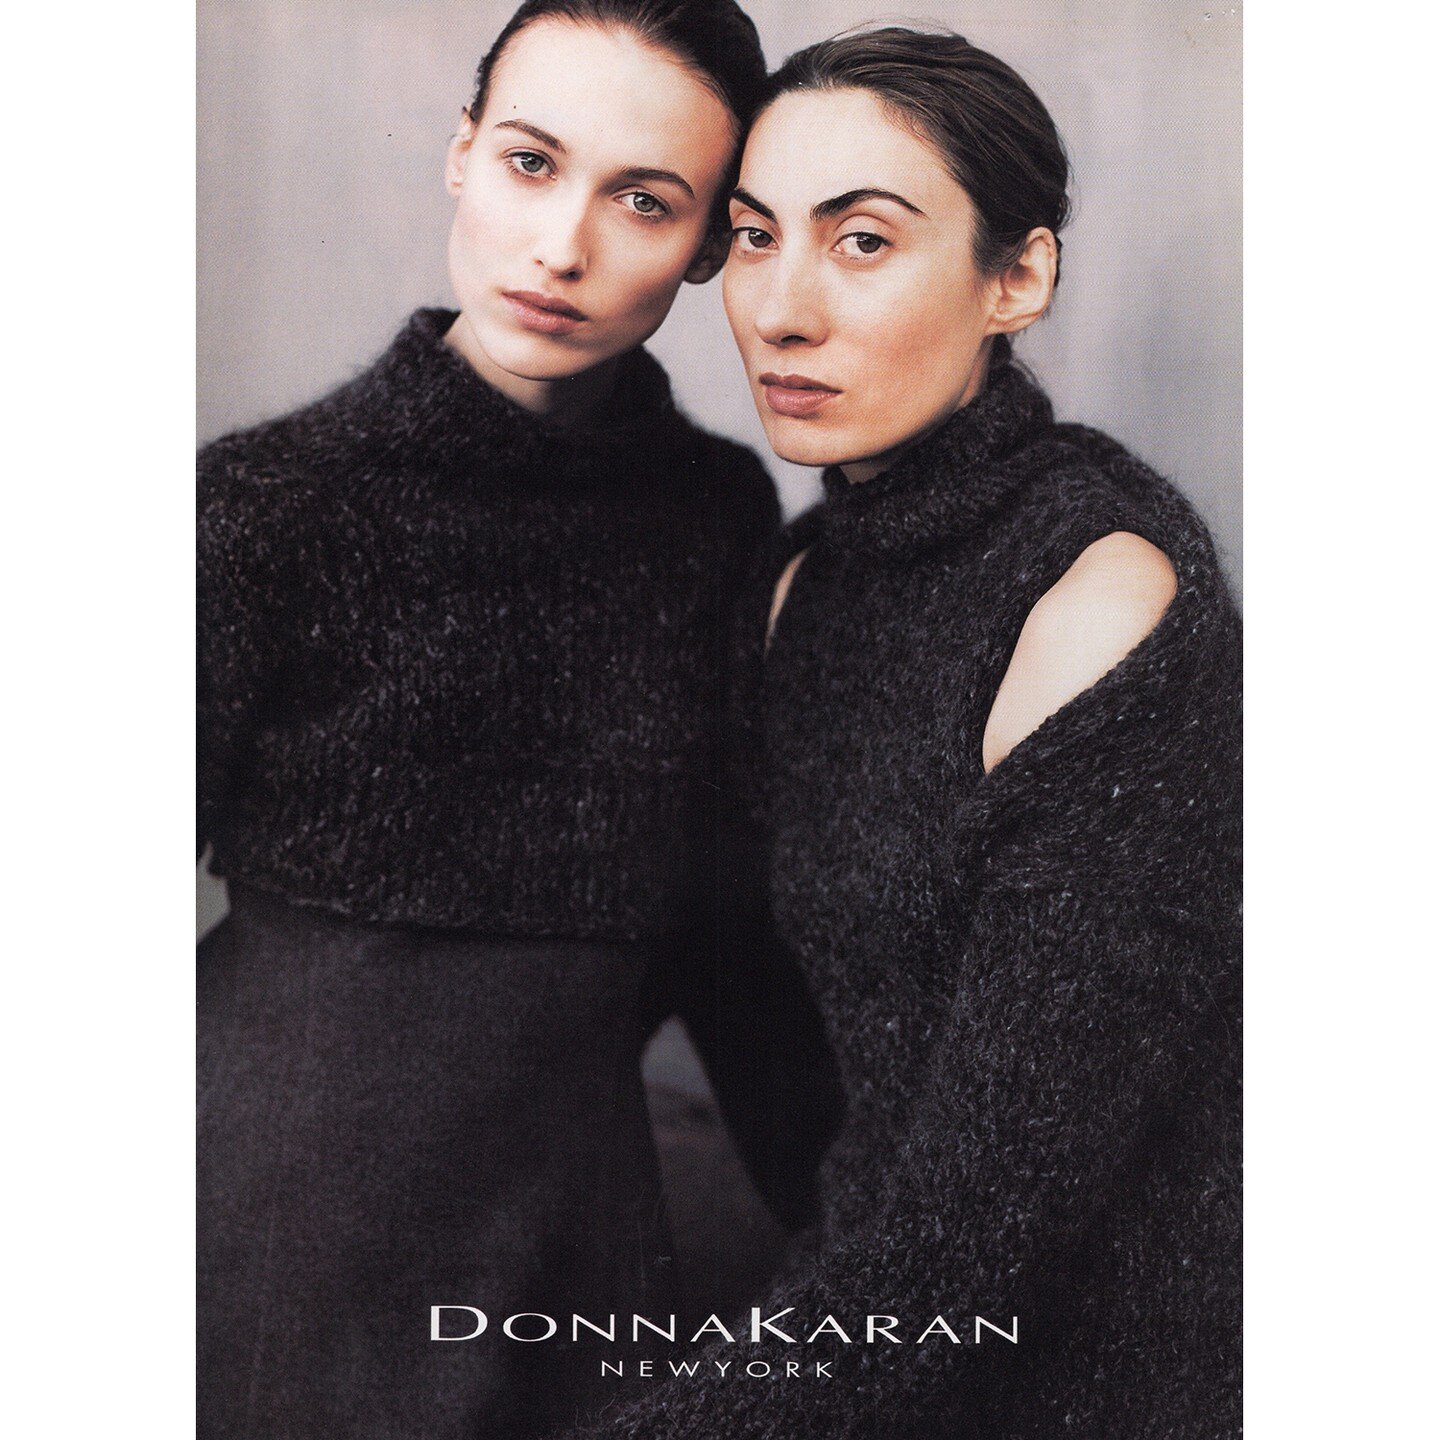 #CASHMERE #donnakarannewyork
#ARCHIVE #90's #throwback ✨

...feeling quite emotional and nostalgic... 

CASHMERE TWEED CHUNKY KNIT

COLD SHOULDER

#donnakarancashmere
#systemofdressing
#peterlindbergh #peterlindberghphotography